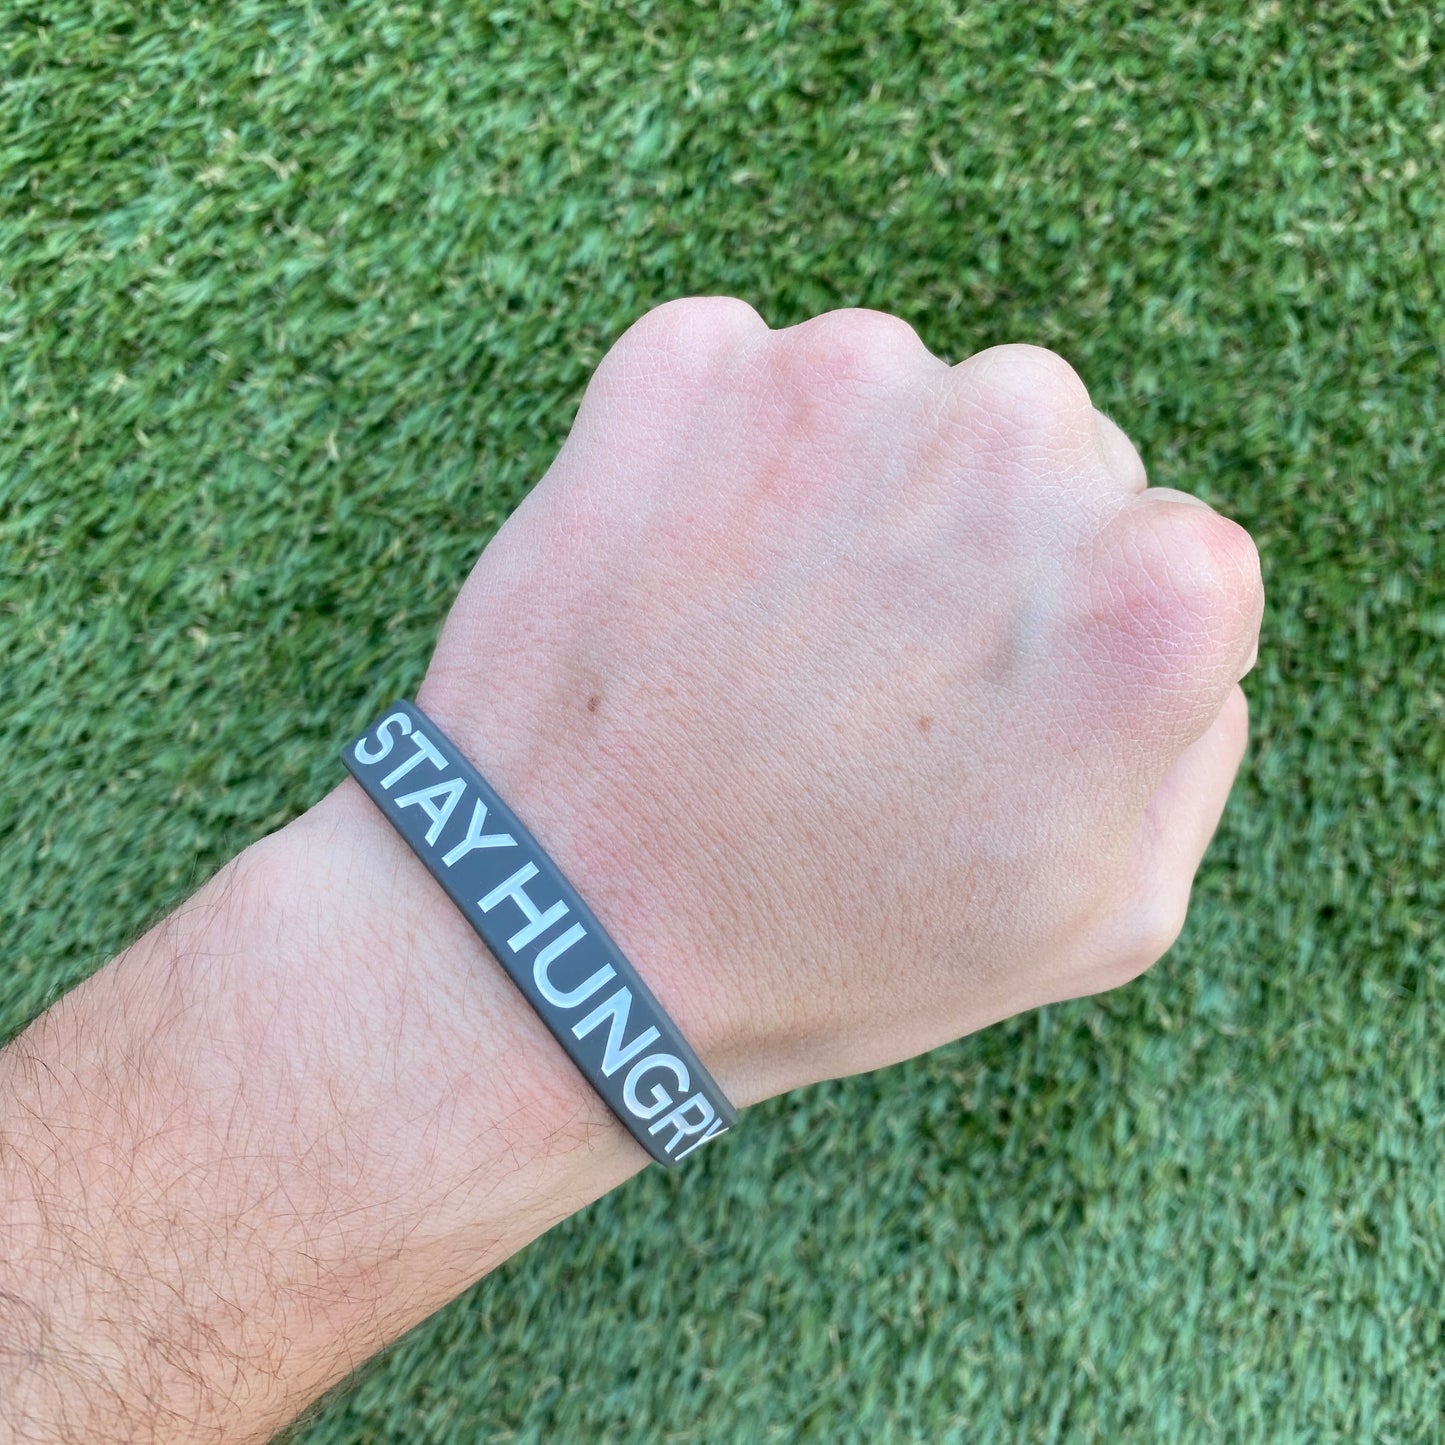 STAY HUNGRY Wristband - Southern Grace Creations